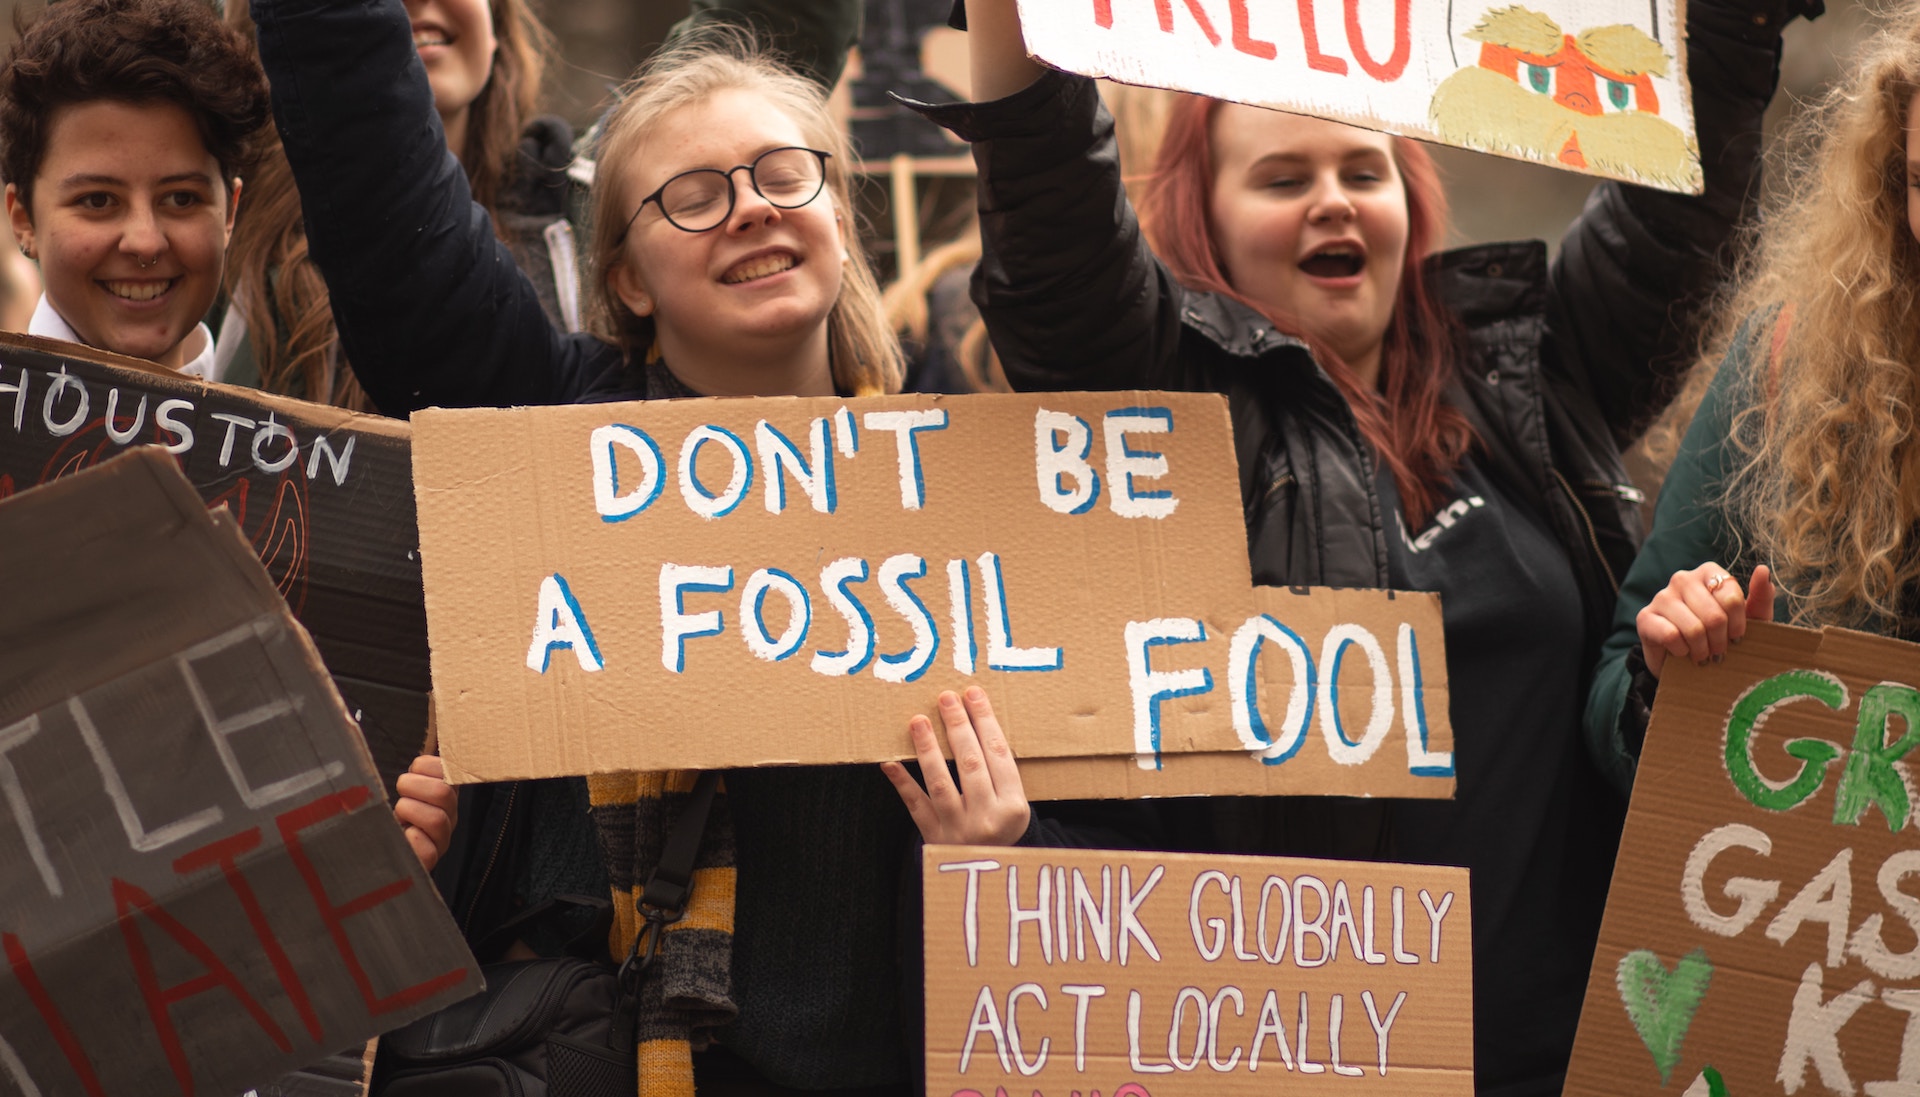 Young people at a climate protest in birmingham with a sign that says "don't be a fossil fool" and "think globally act locally"